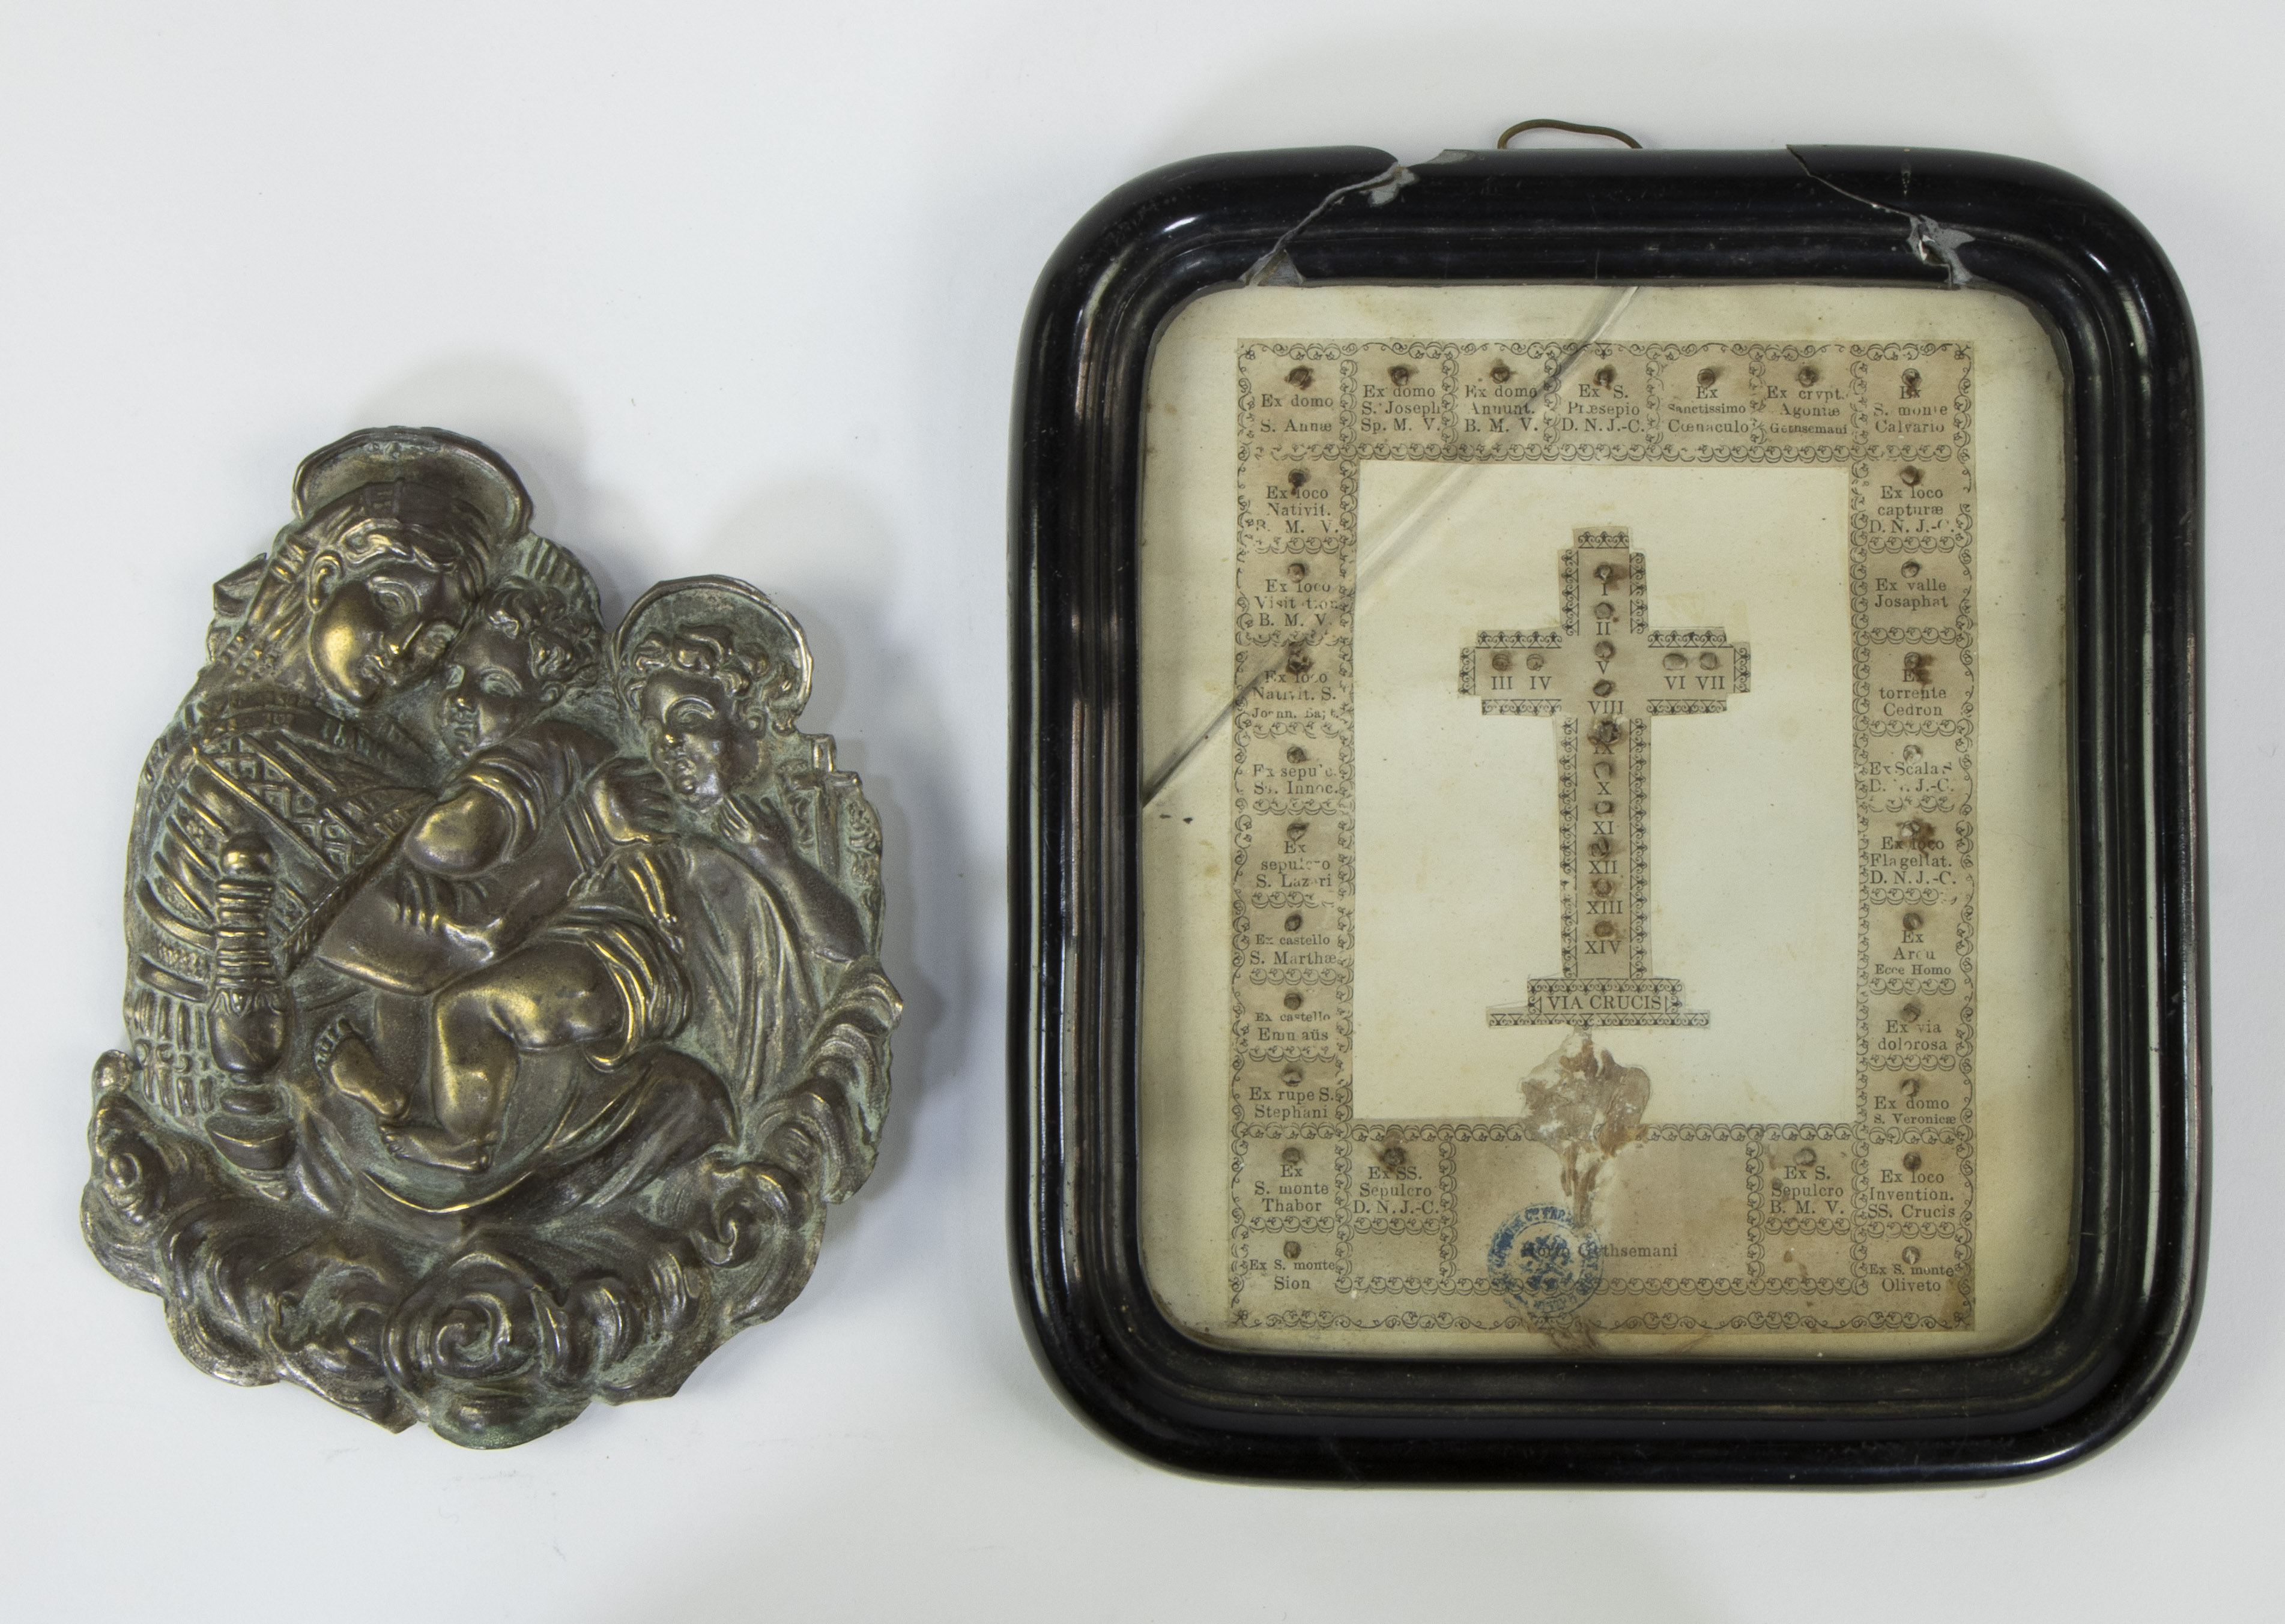 Document FR. JOSEPH BARTHO LOMAEUS MENOCHIO ORD. EREMIT S. AUGUSTINI 1810 with reliquary and silver - Image 5 of 5